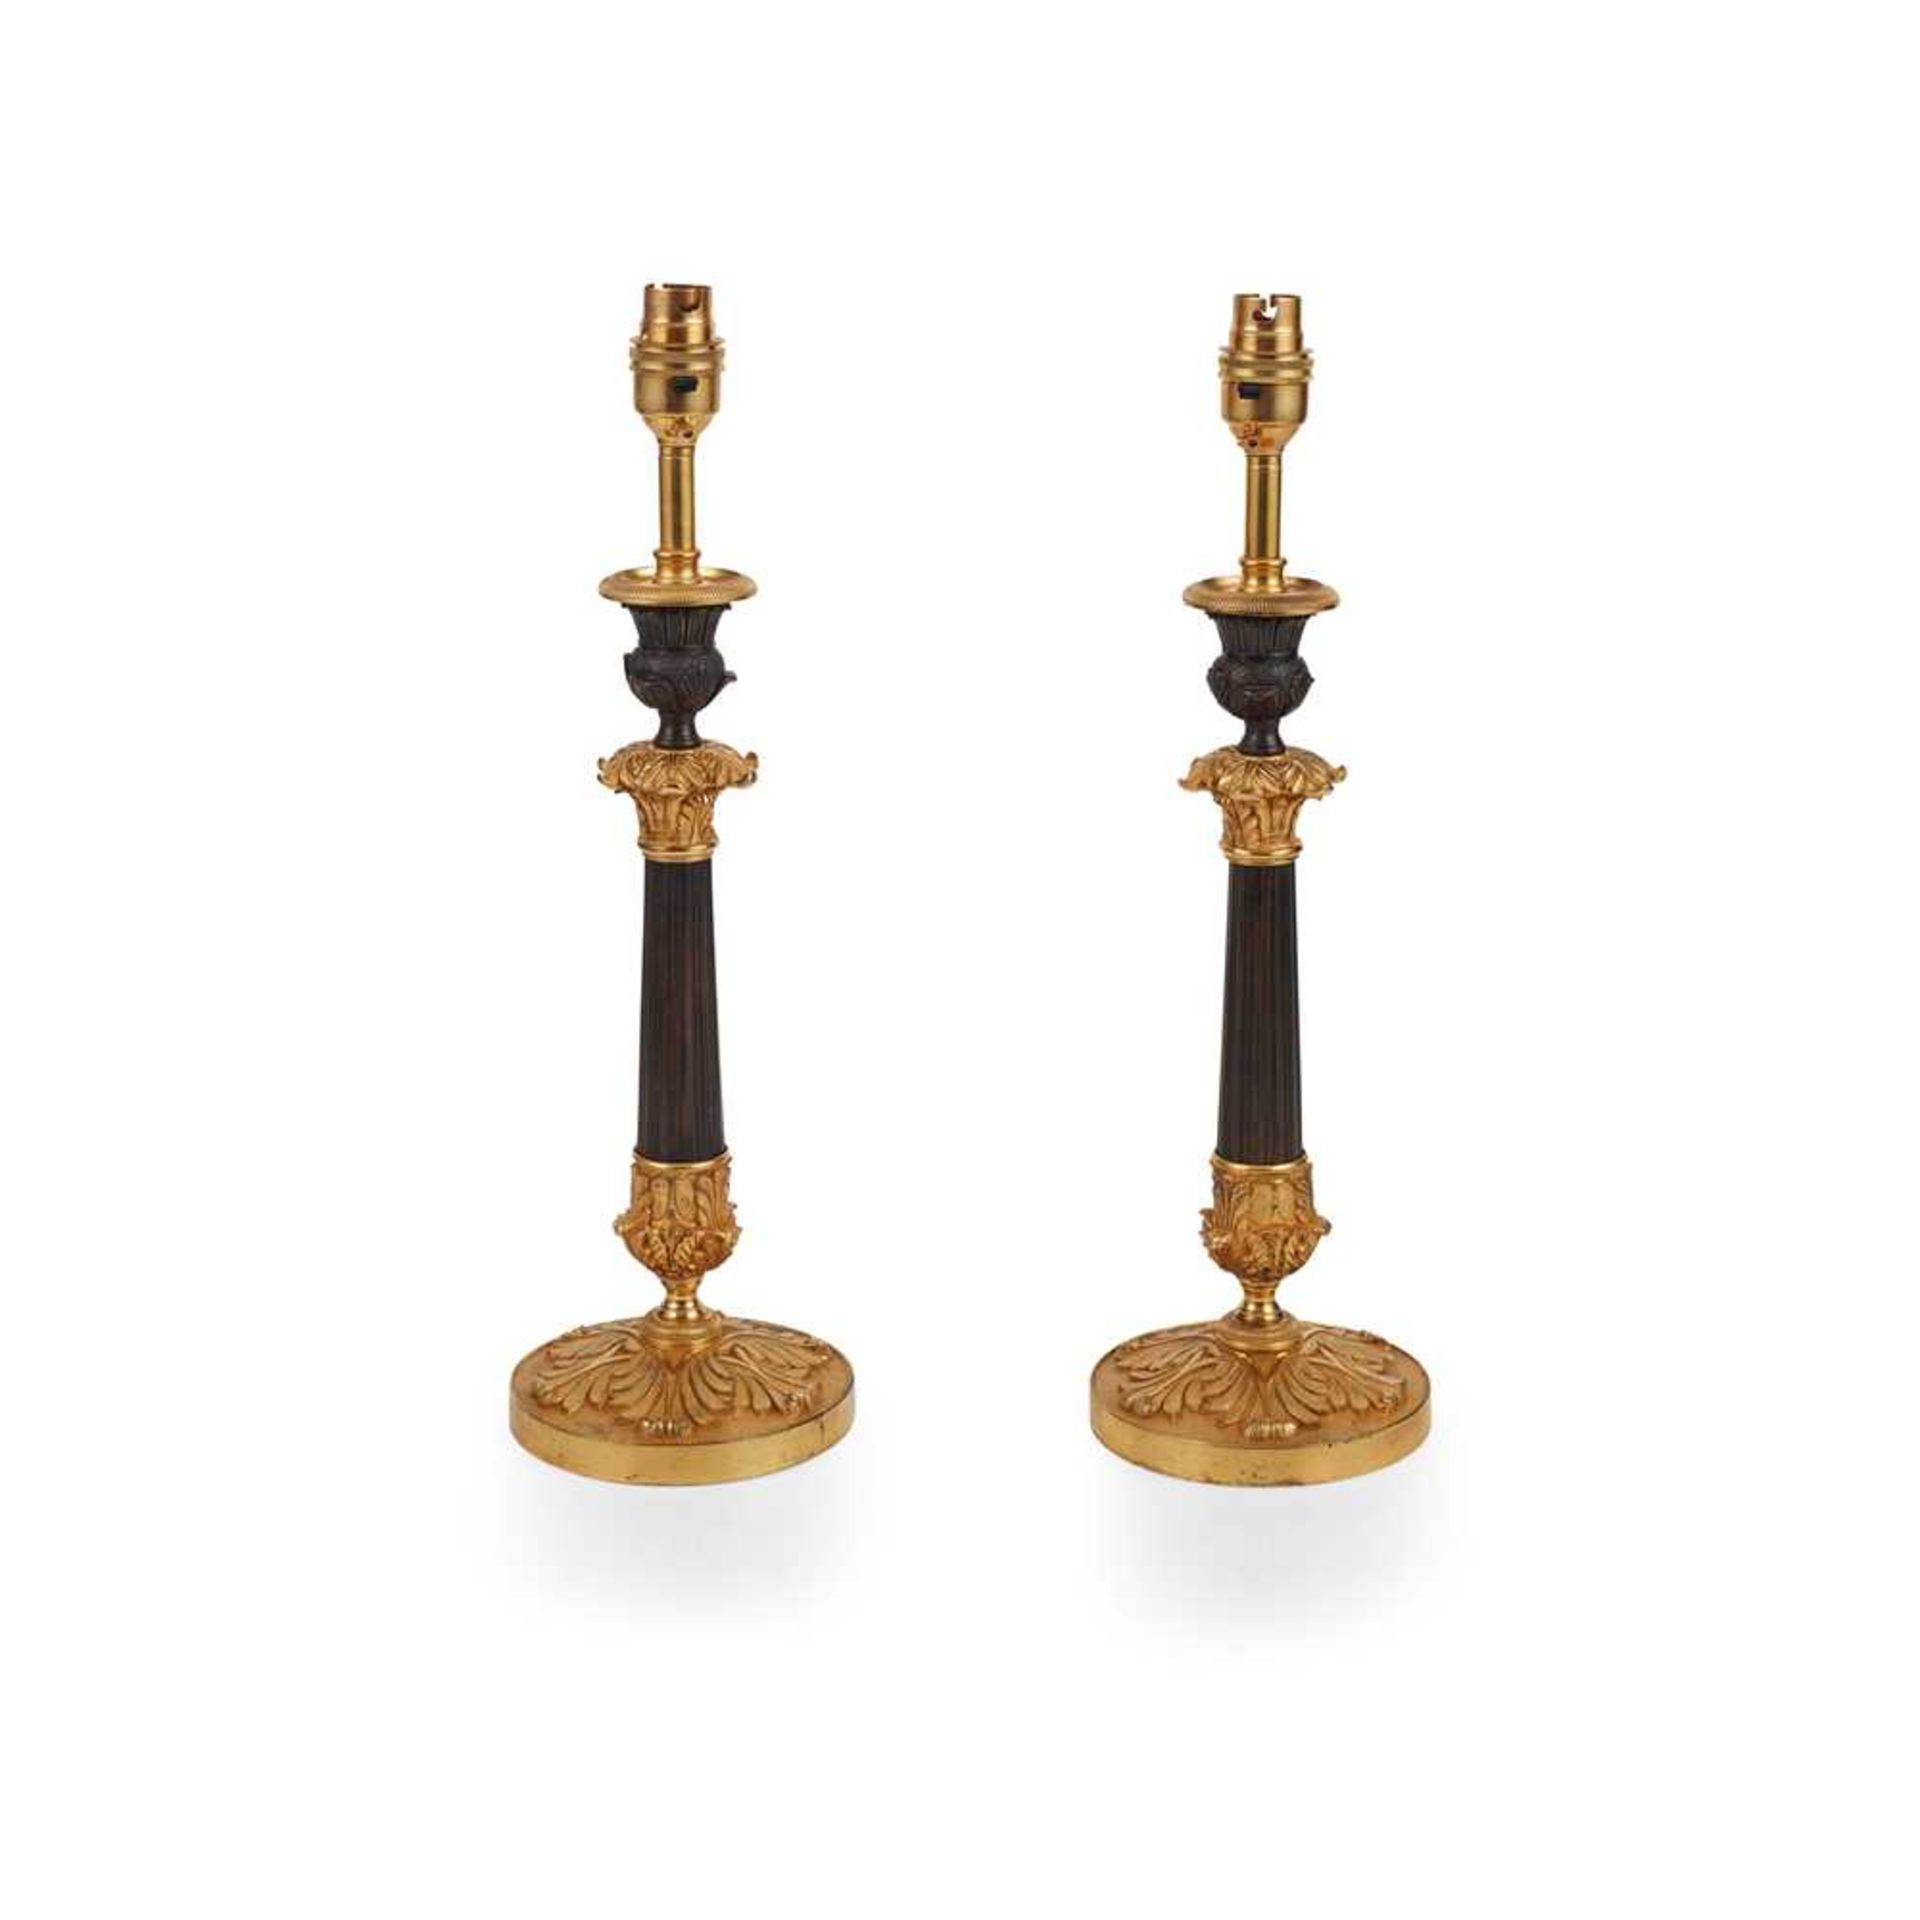 PAIR OF REGENCY PATINATED AND GILT BRONZE LAMPS EARLY 19TH CENTURY - Image 2 of 2